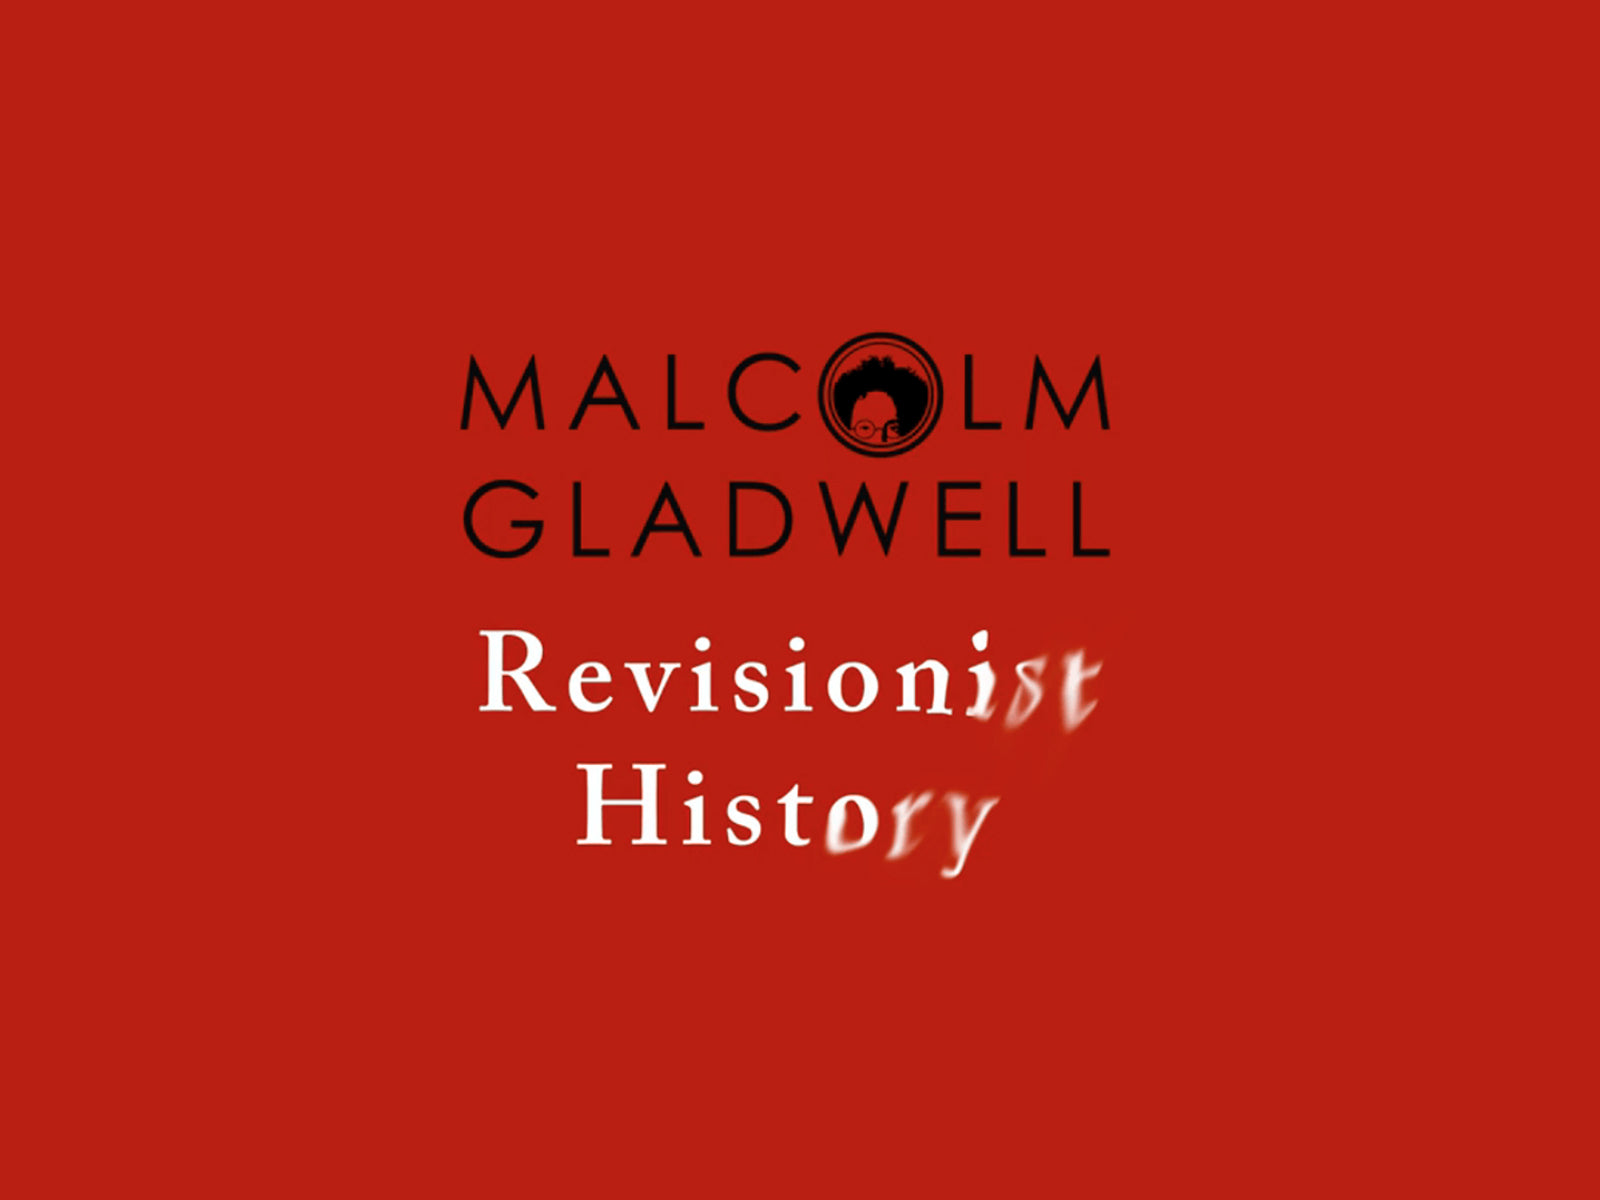 Malcolm Gladwell - Revisionist History Podcast